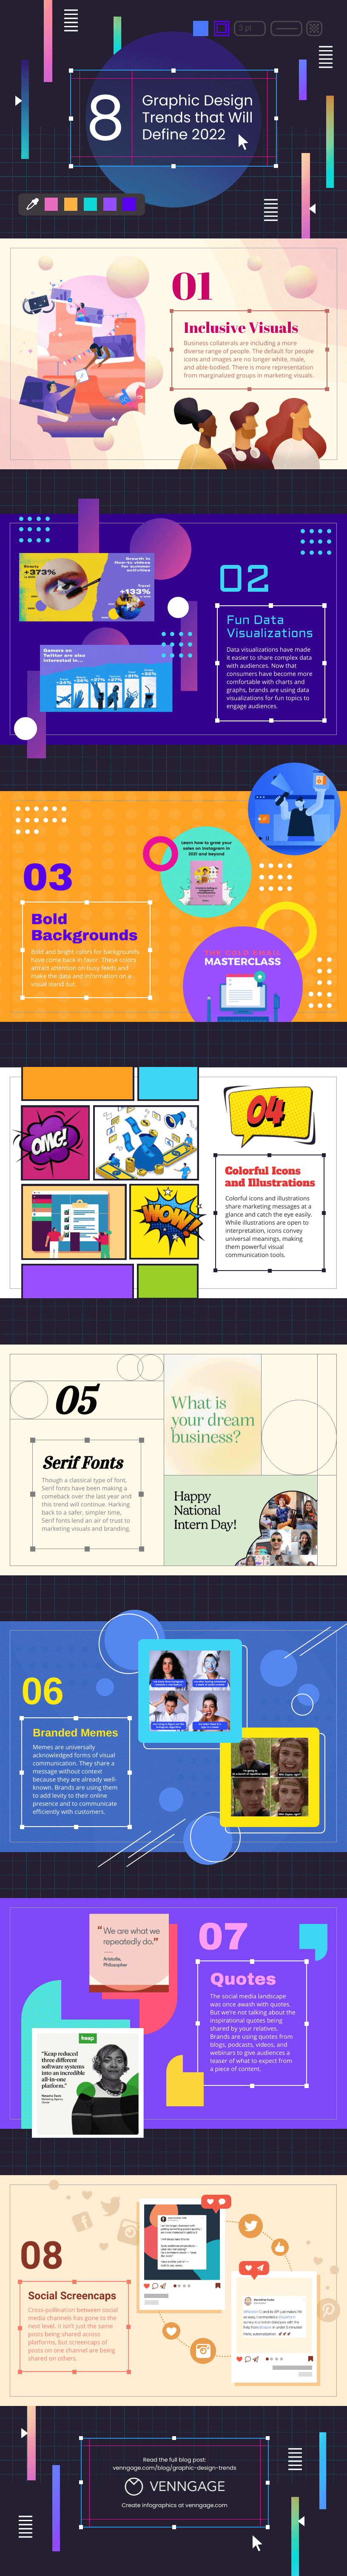 8 Graphic Design Trends that Will Define 2022 Infographic